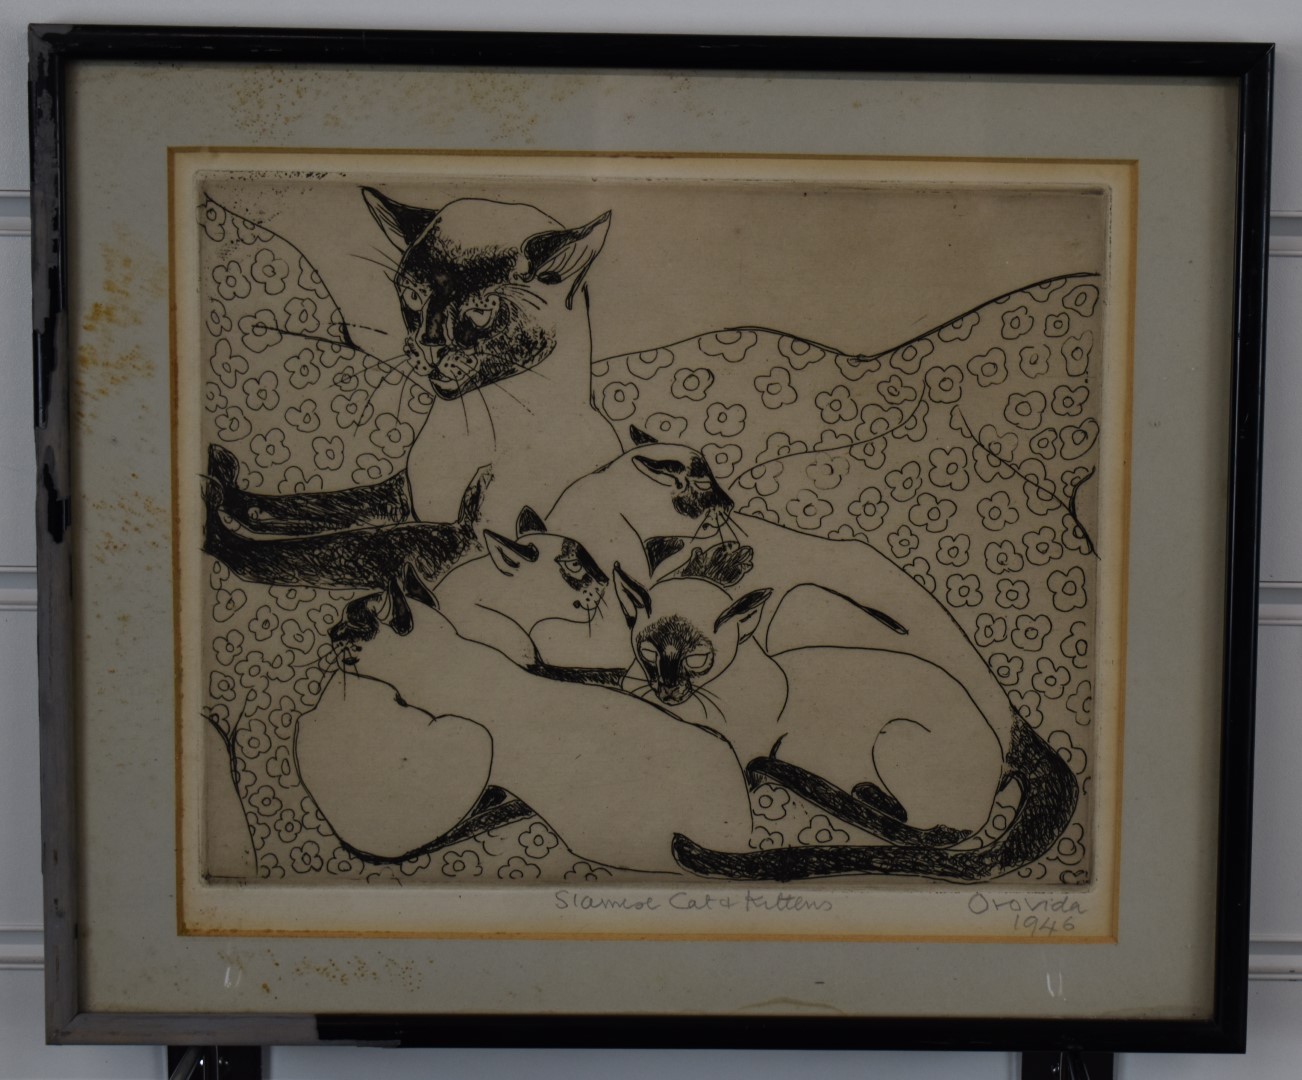 Orovida Camille Pissarro signed etching 'Siamese Cat & Kittens', dated 1946 lower right 20 x 25cm - Image 2 of 4